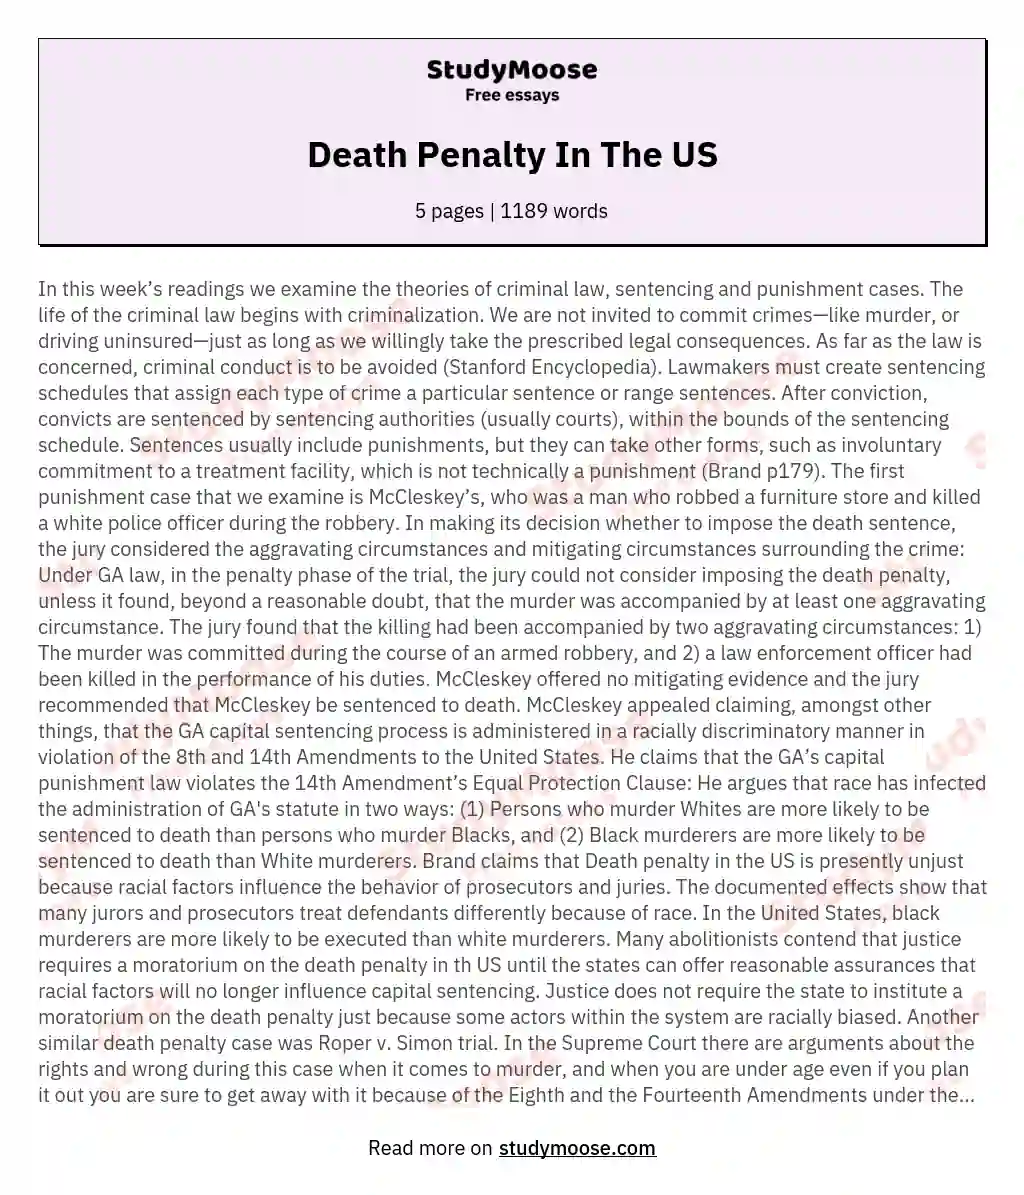 Death Penalty In The US essay